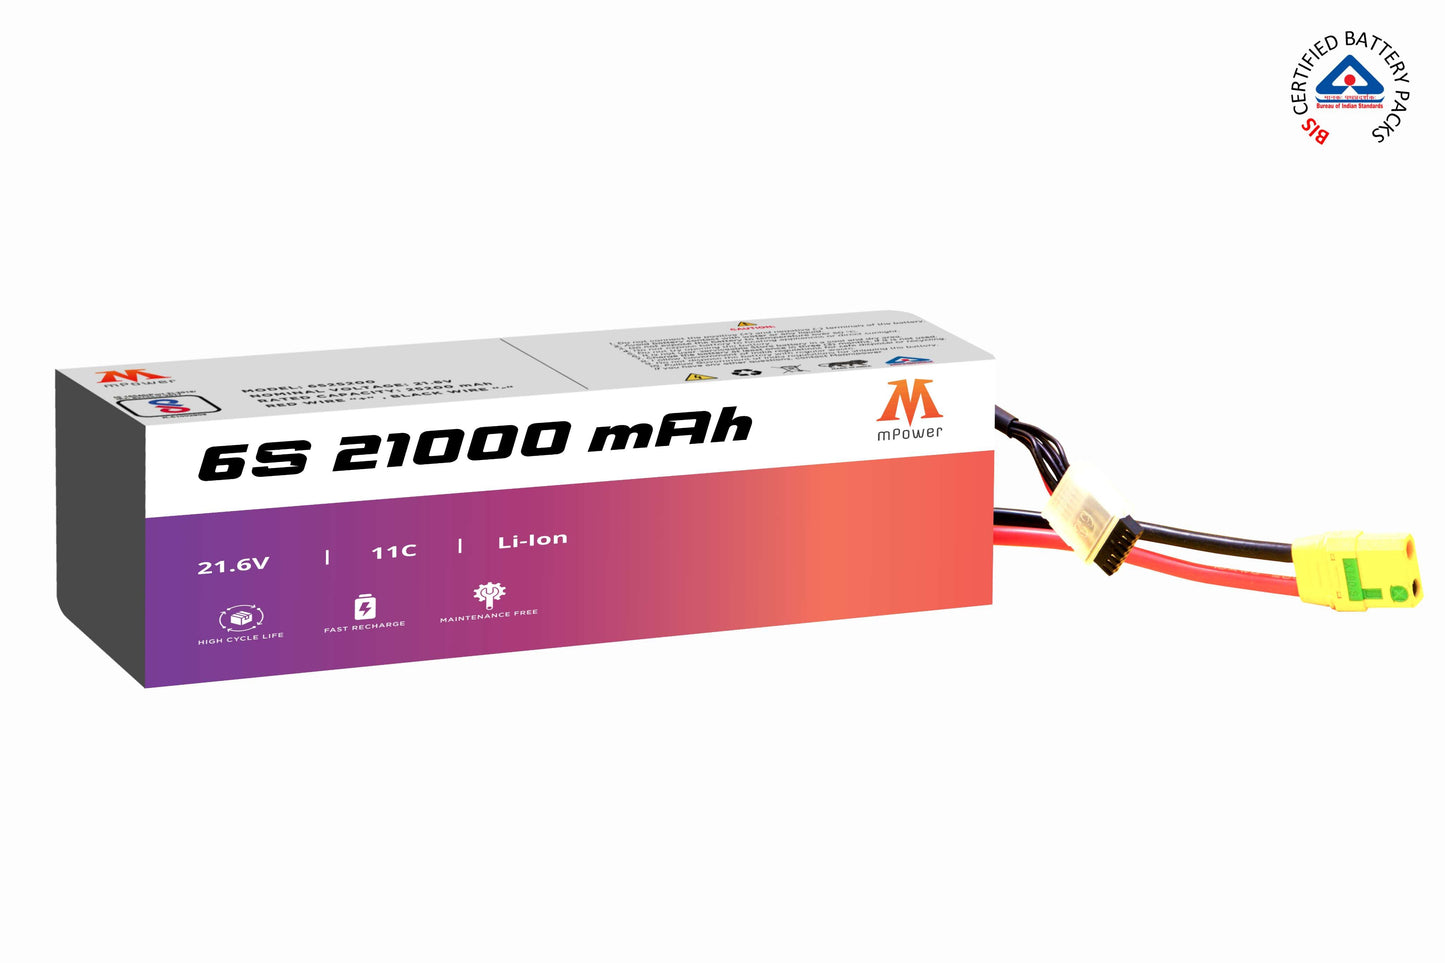 mPower 6S 21000mAh Lithium-Ion Battery for Delivery Drones